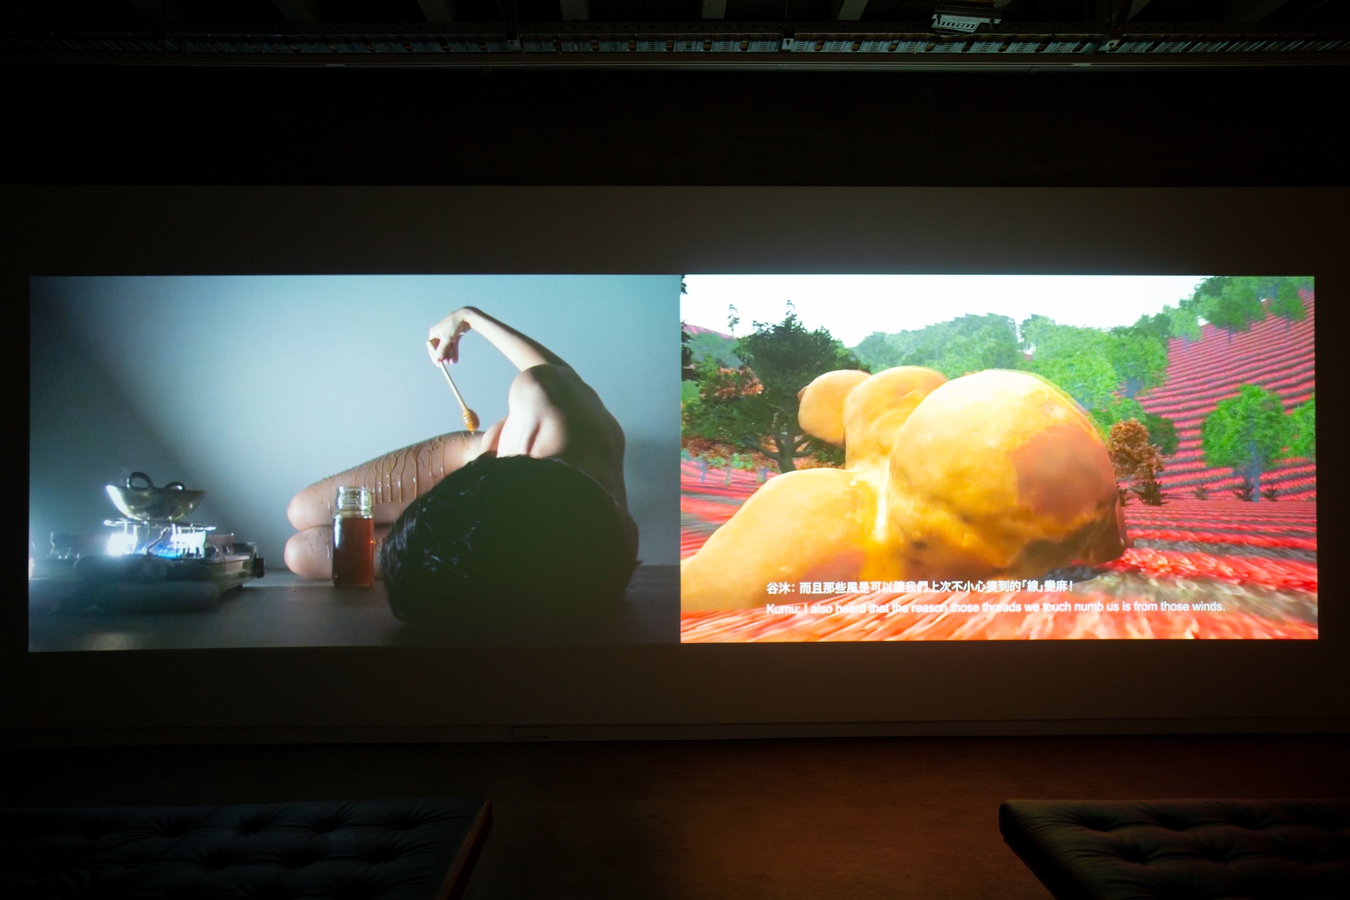 Image: Anchi Lin (Ciwas Tahos), Perhaps she comes from/to__Alang (installation view), 2021. Photo by Amy Weng.